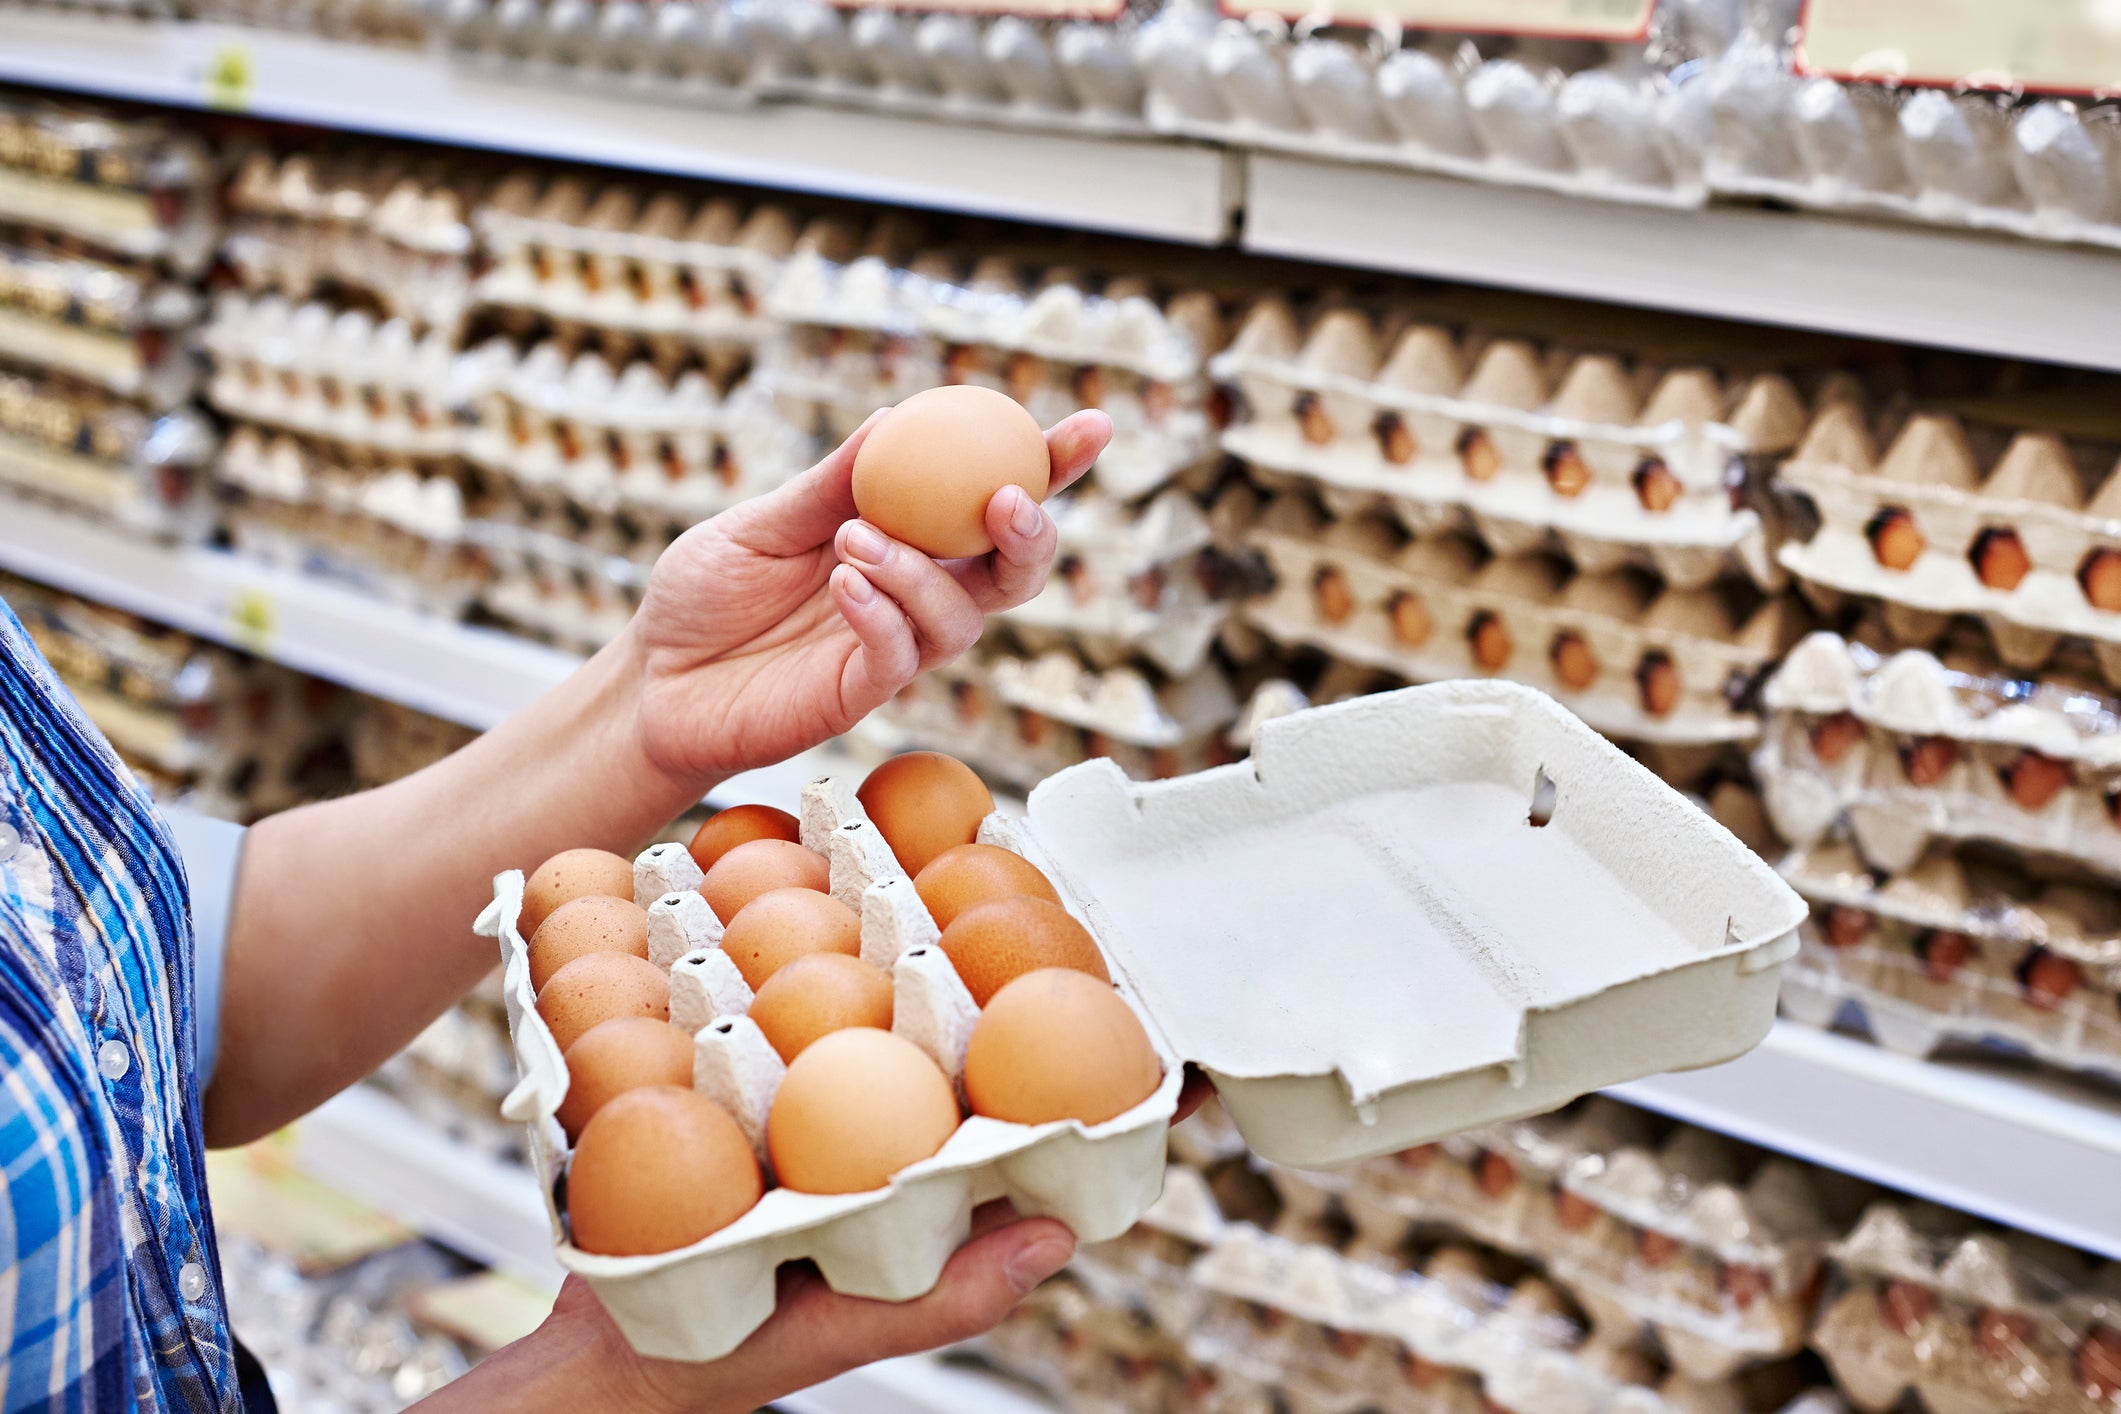 Some supermarkets have taken to rationing boxes of eggs amid the bird flu outbreak